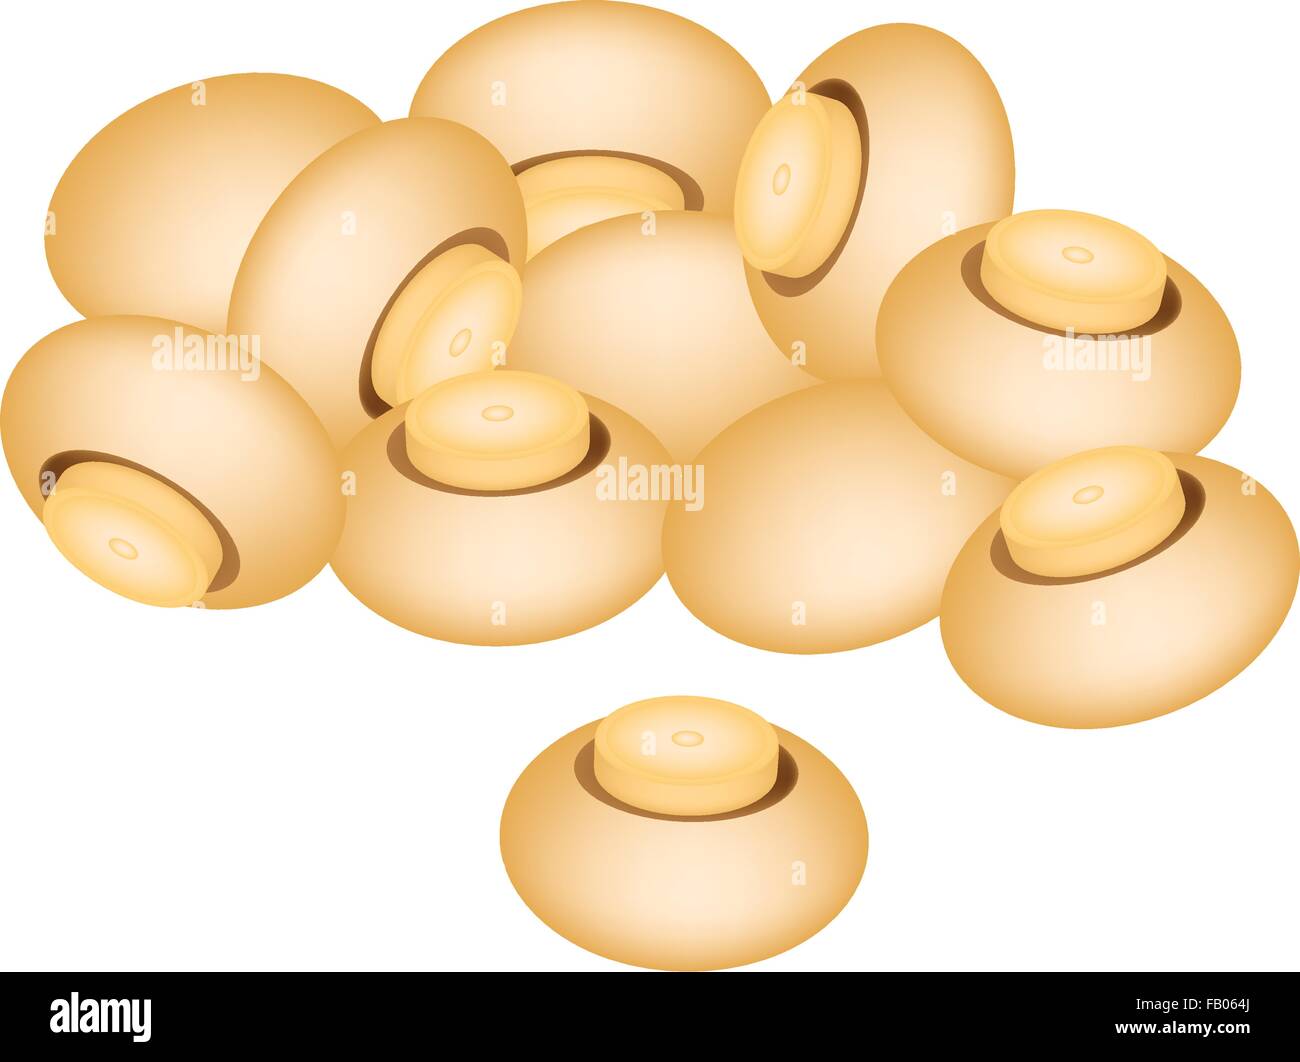 Vegetable, Vector Illustration of A Pile of Champignons or Chestnut Mushrooms Isolated on A White Background. Stock Vector